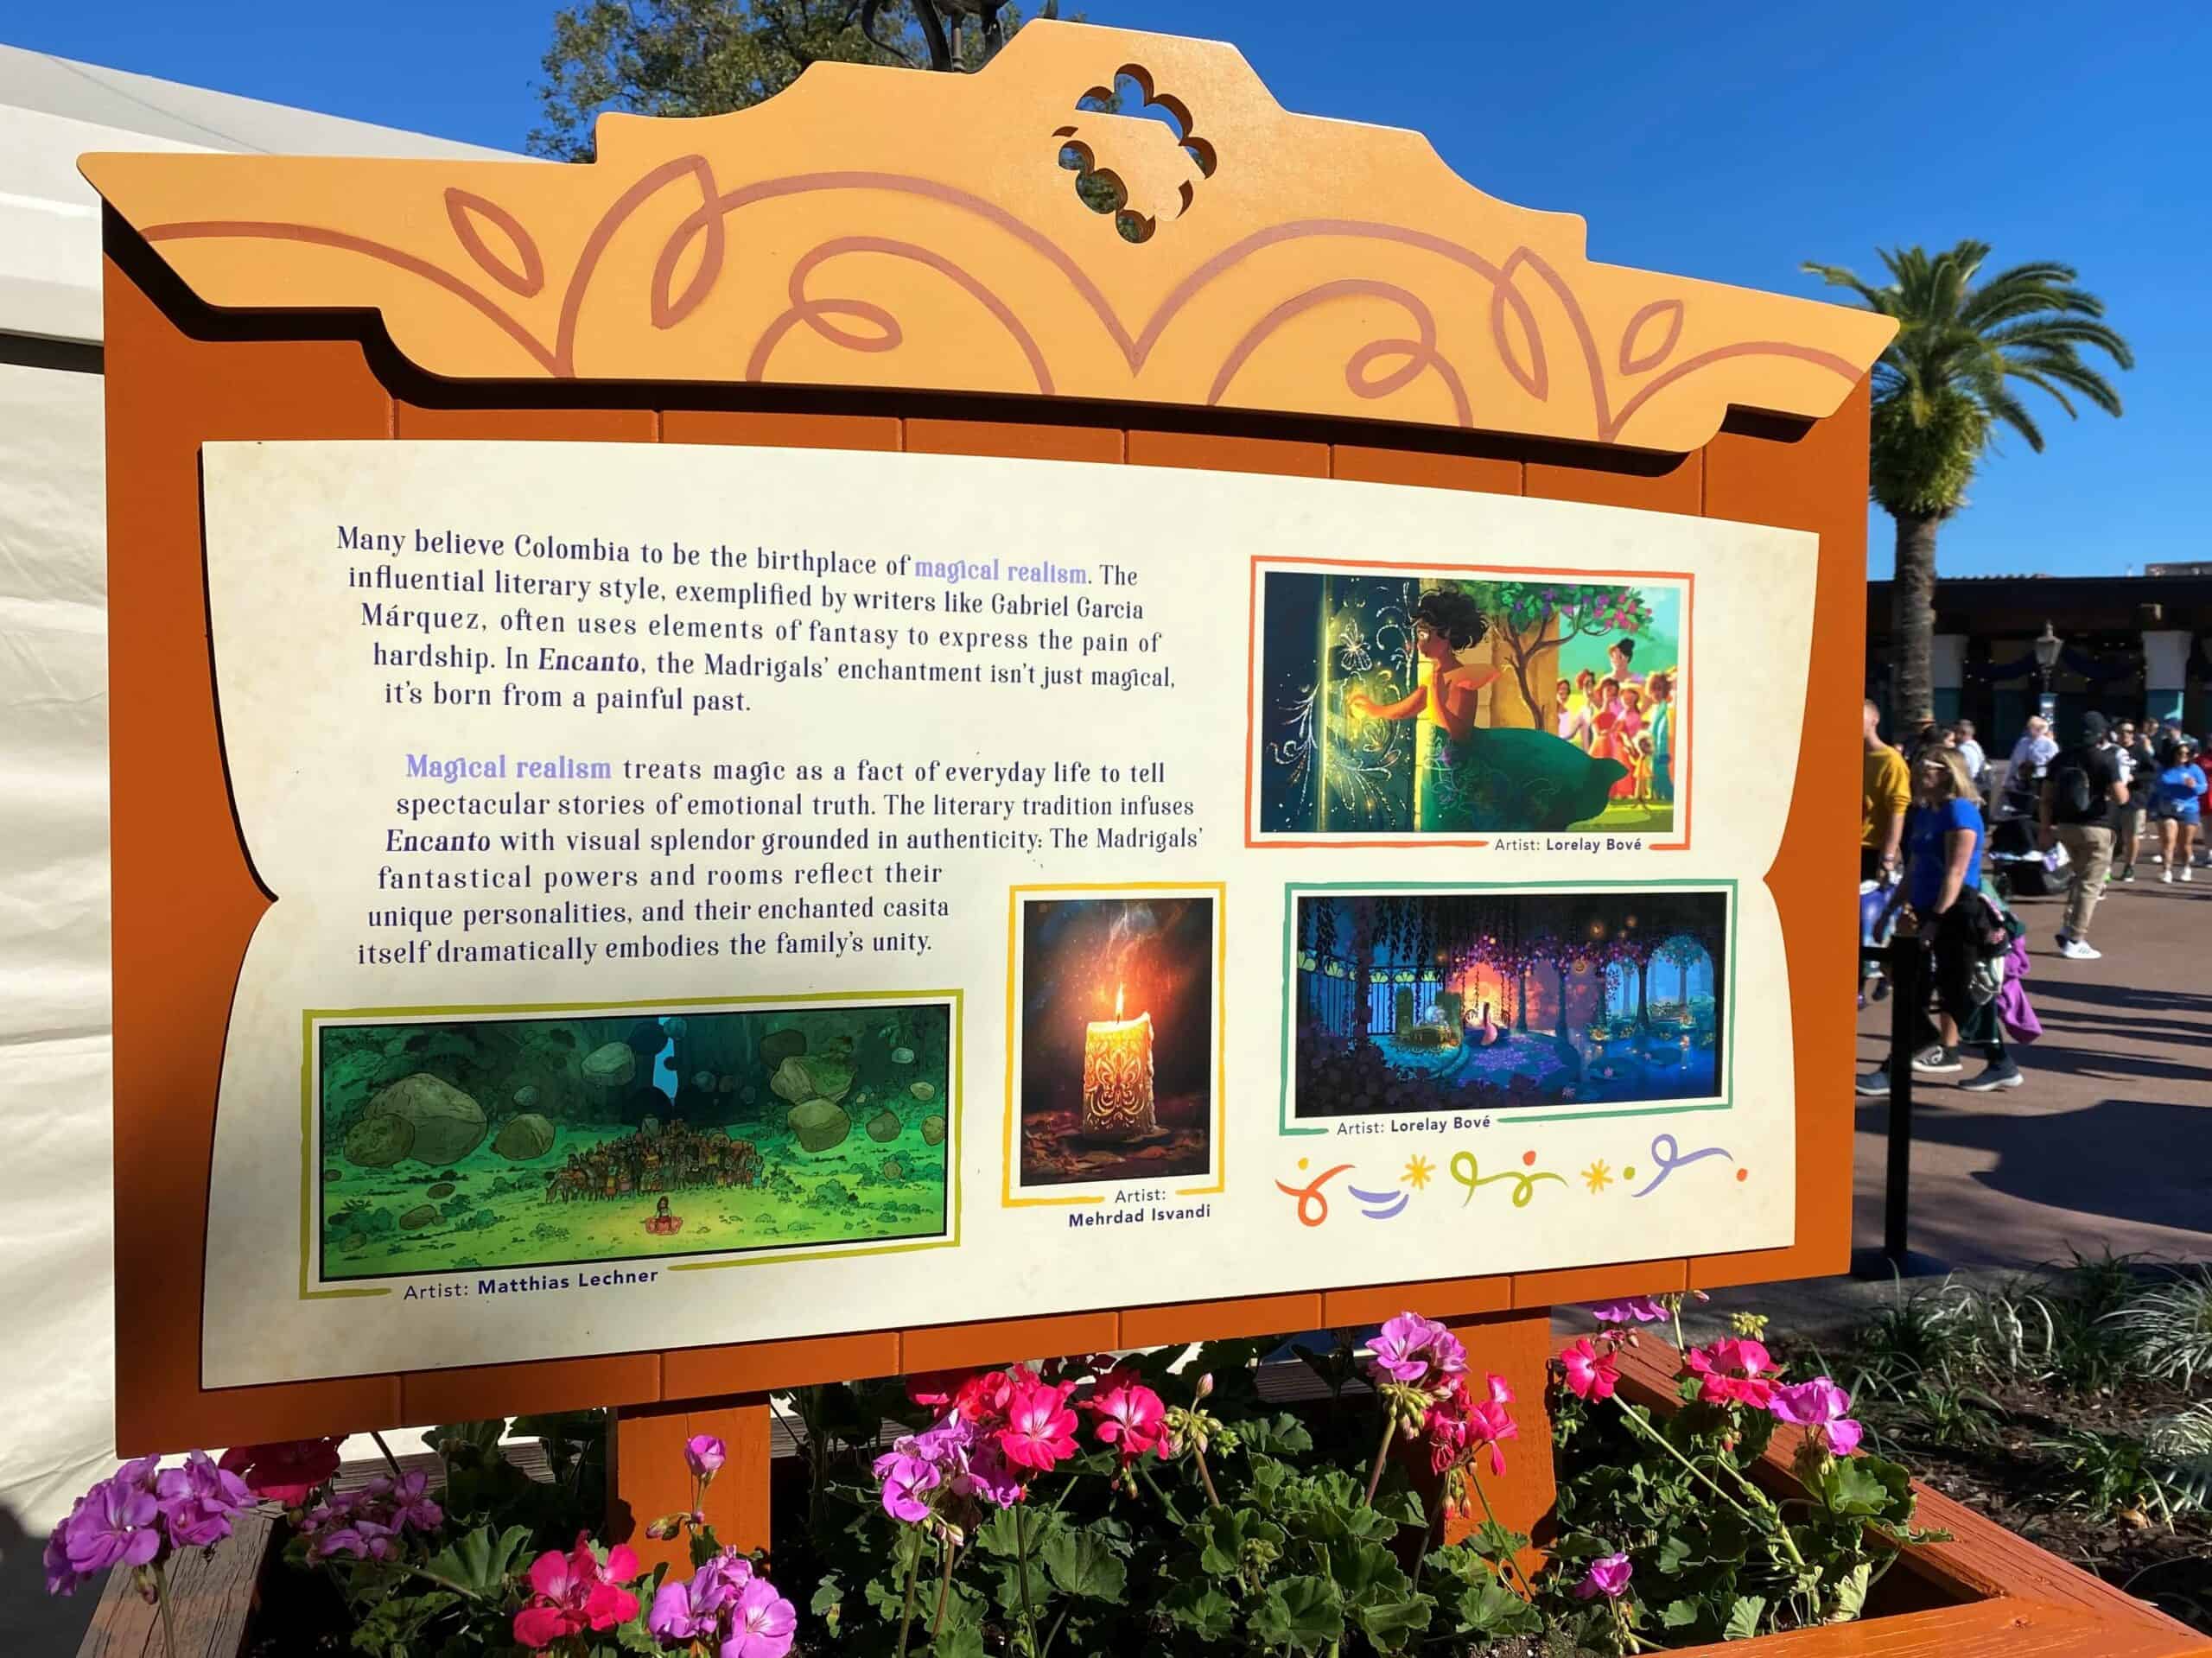 Encanto Concept Art and Info at Epcot Art Festival 2 is on display on horizontal signs inside flower boxes, with bright bold colors